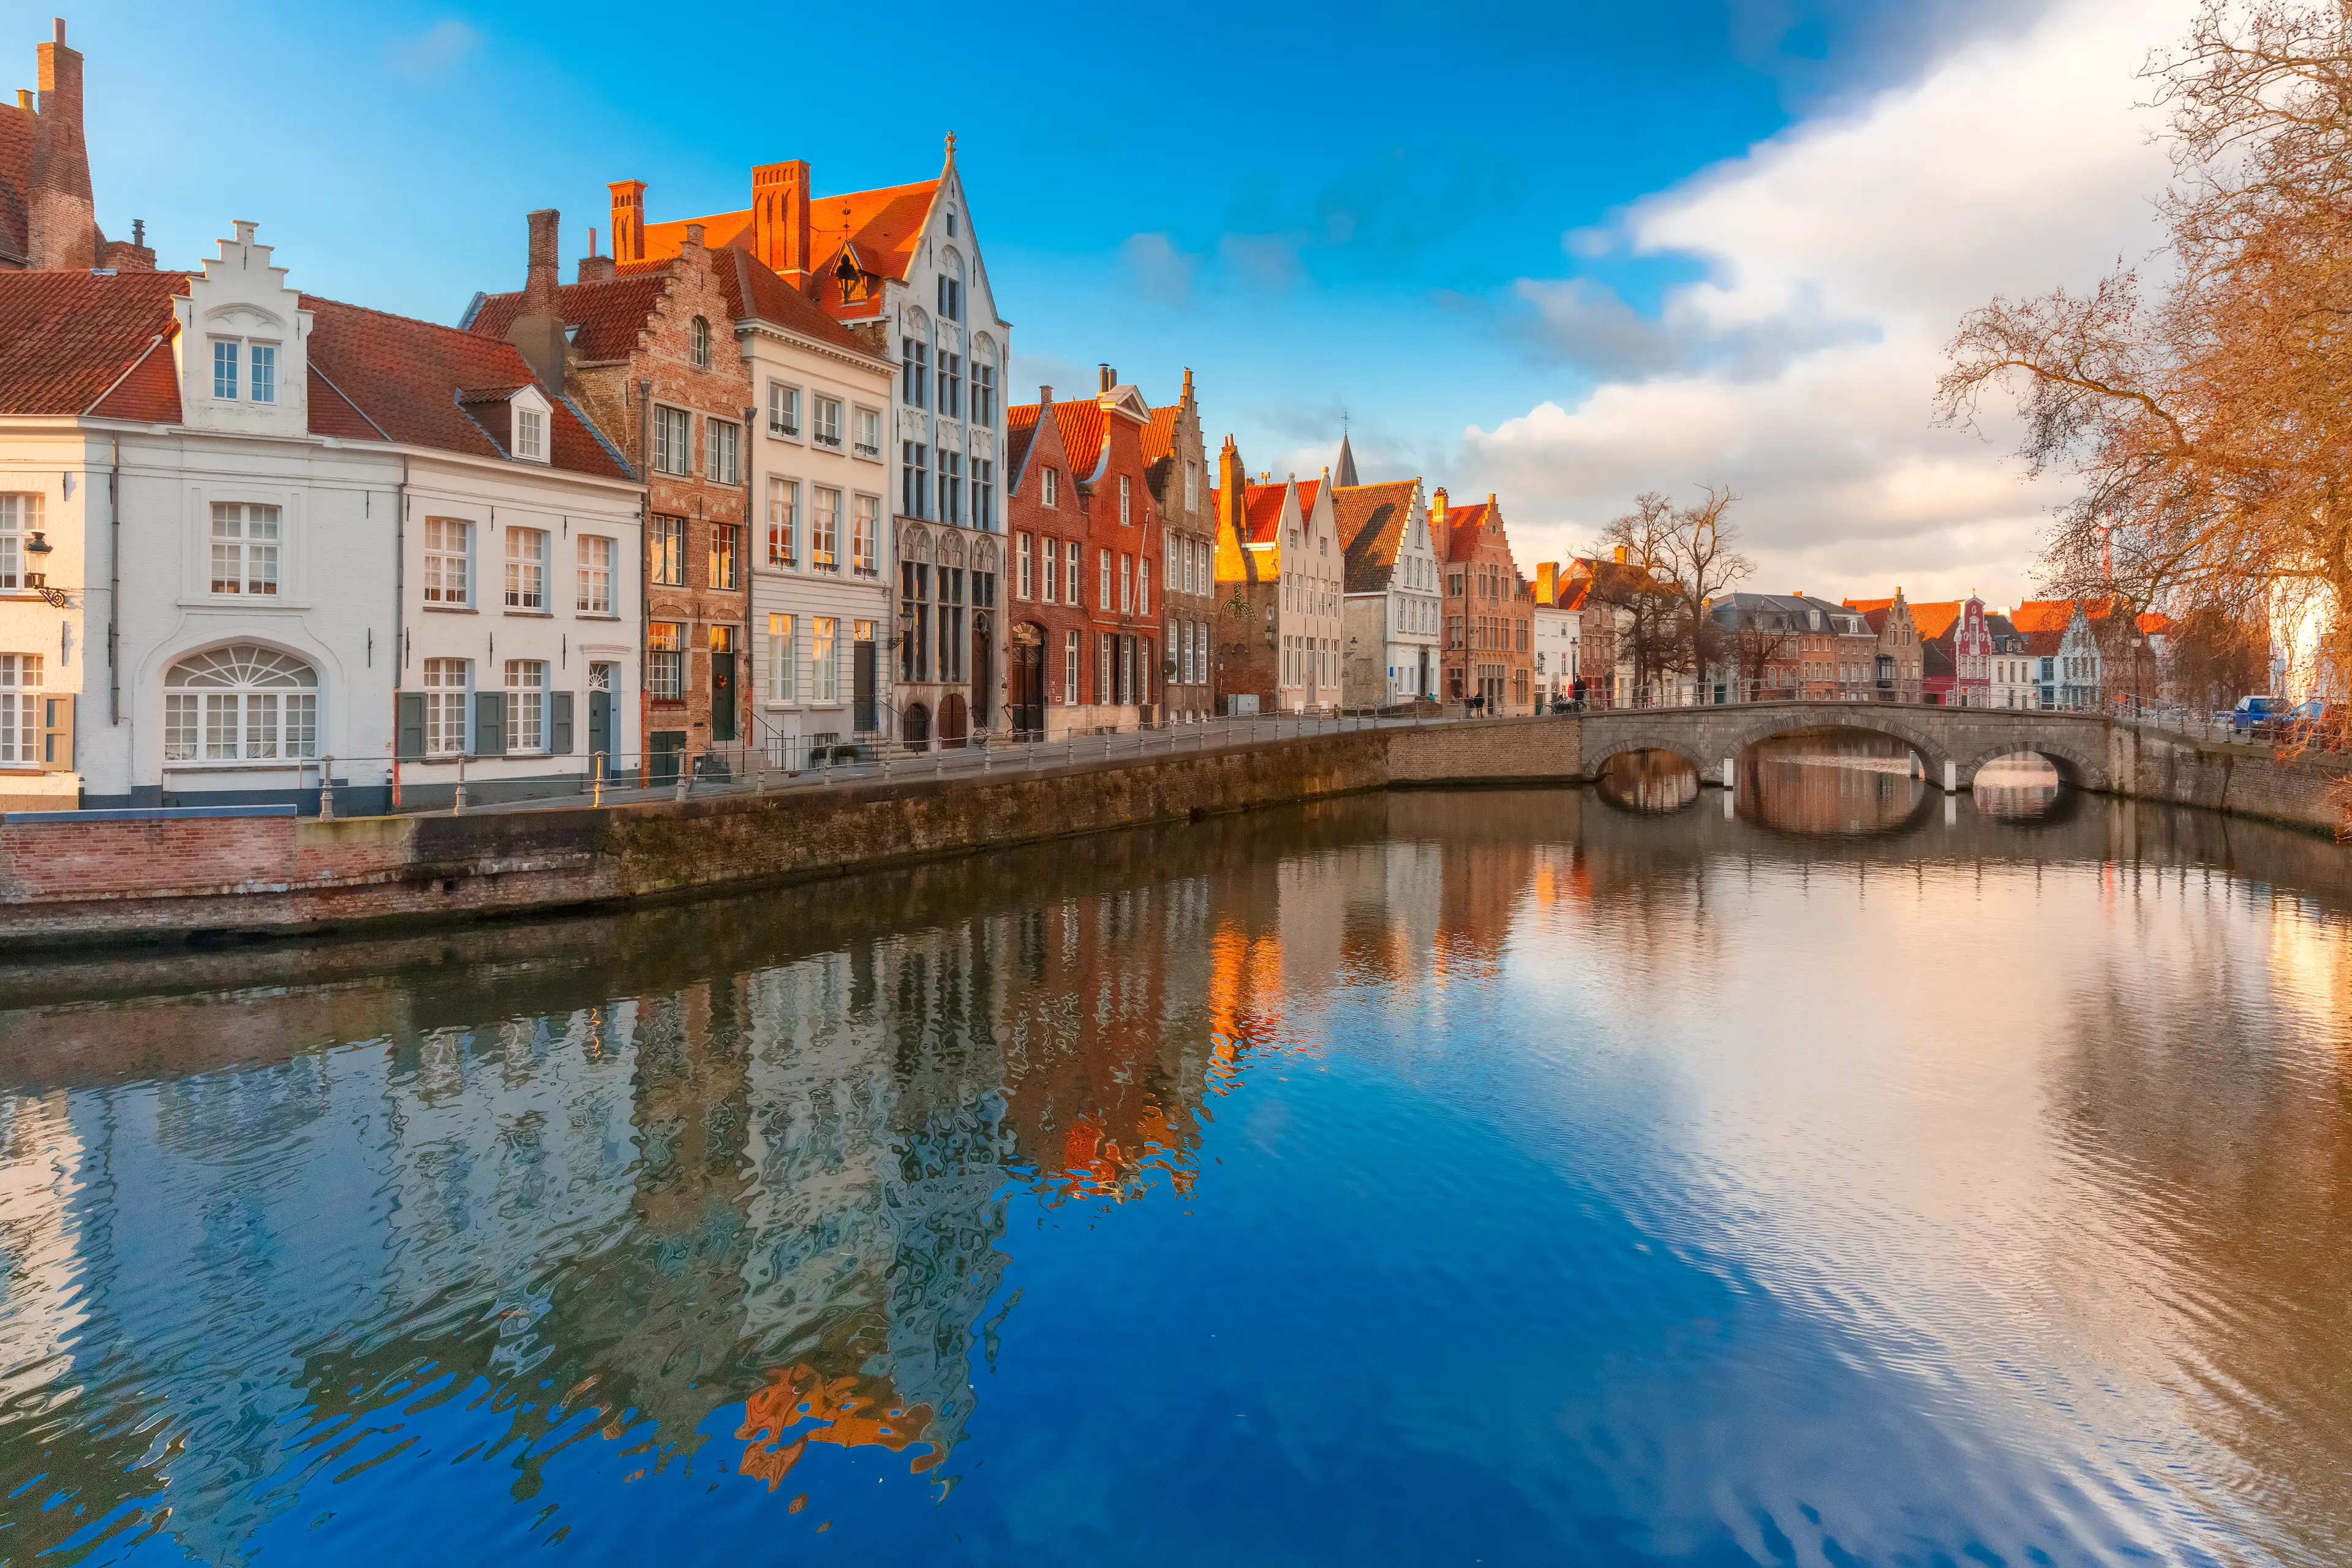 1-Day Adventure and Sightseeing Tour in Bruges with Friends